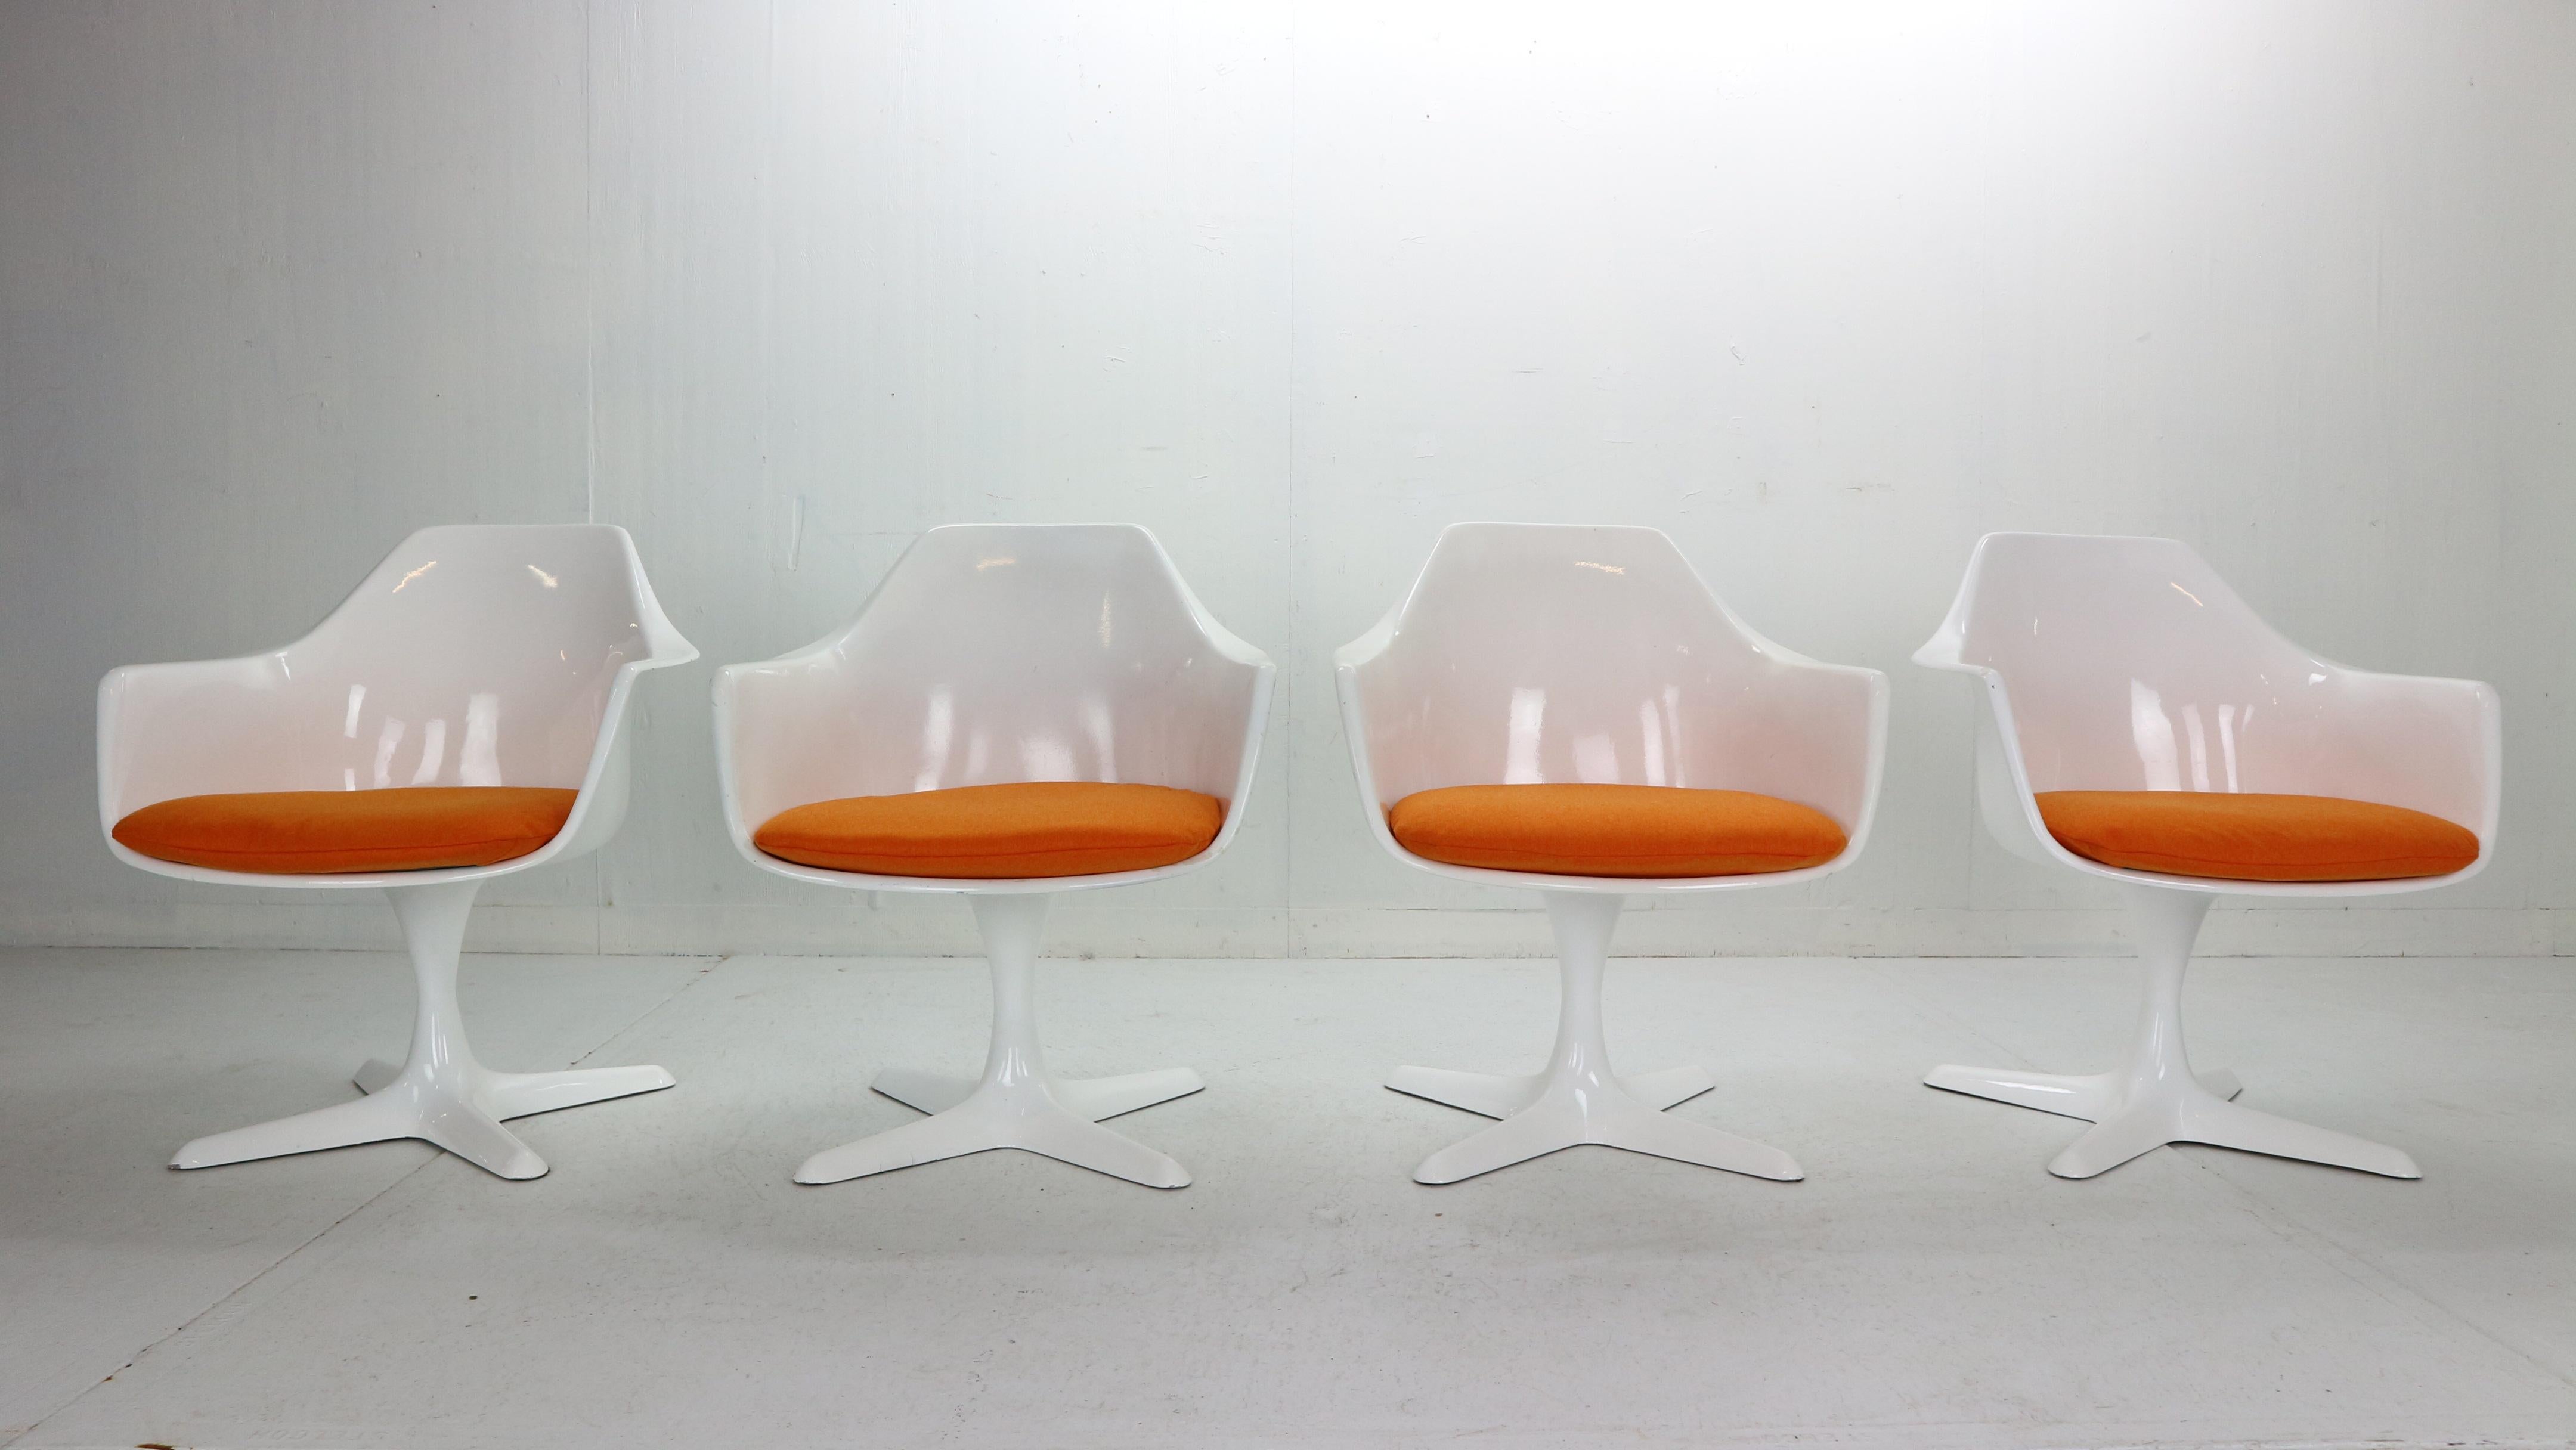 Space Age period set of four lounge chairs designed by Maurice Burke for Arkana manufacture in 1960's period, UK.
Model No. 116- all of the chairs are originally marked.
Seatings and shelve form back and arm rests are made of white fibreglass,